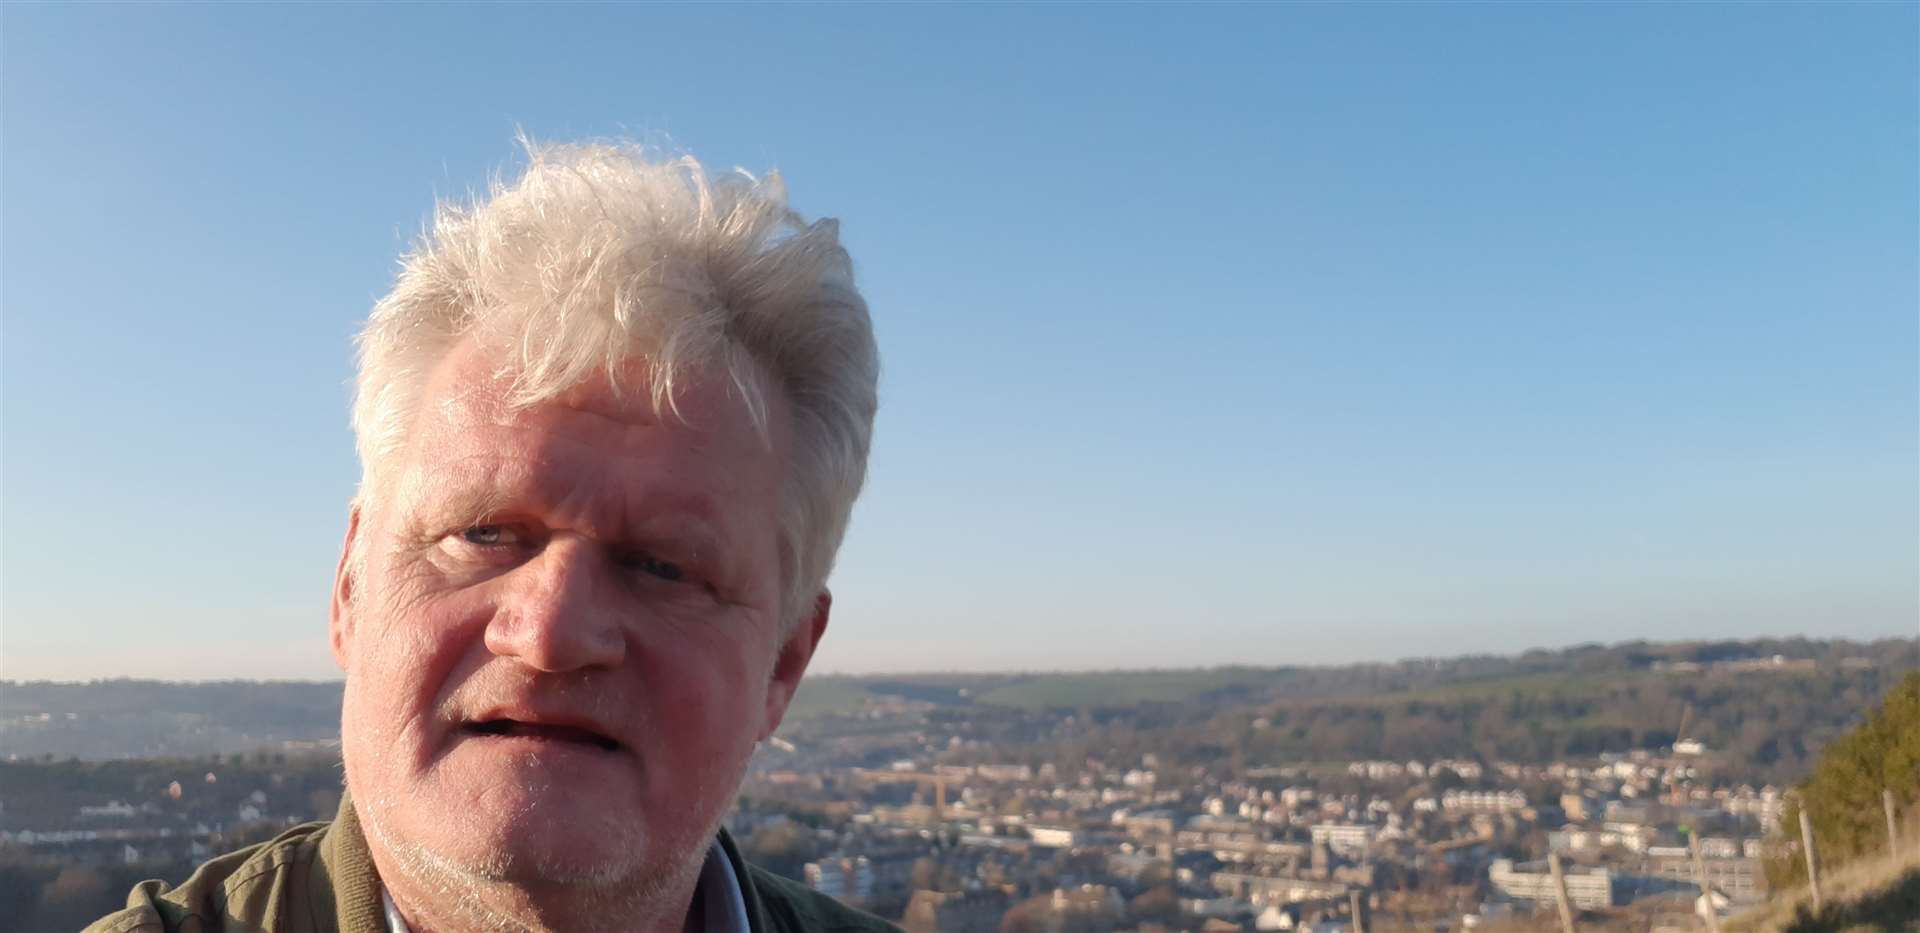 Sam Lennon hillwalking on the Western Heights with the Folkestone Road and Elms Vale area below